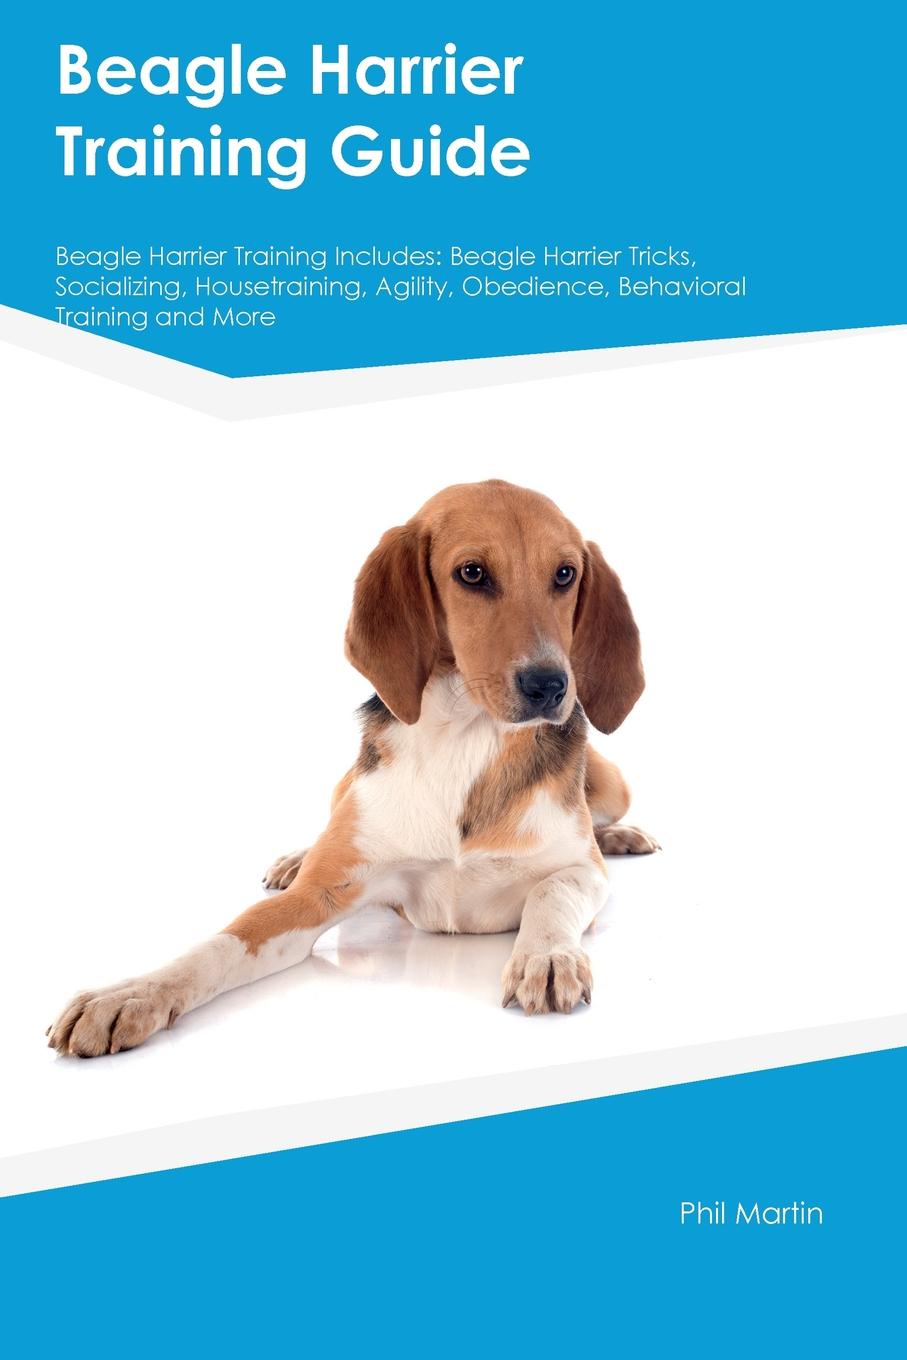 Beagle Harrier Training Guide Beagle Harrier Training Includes. Beagle Harrier Tricks, Socializing, Housetraining, Agility, Obedience, Behavioral Training and More